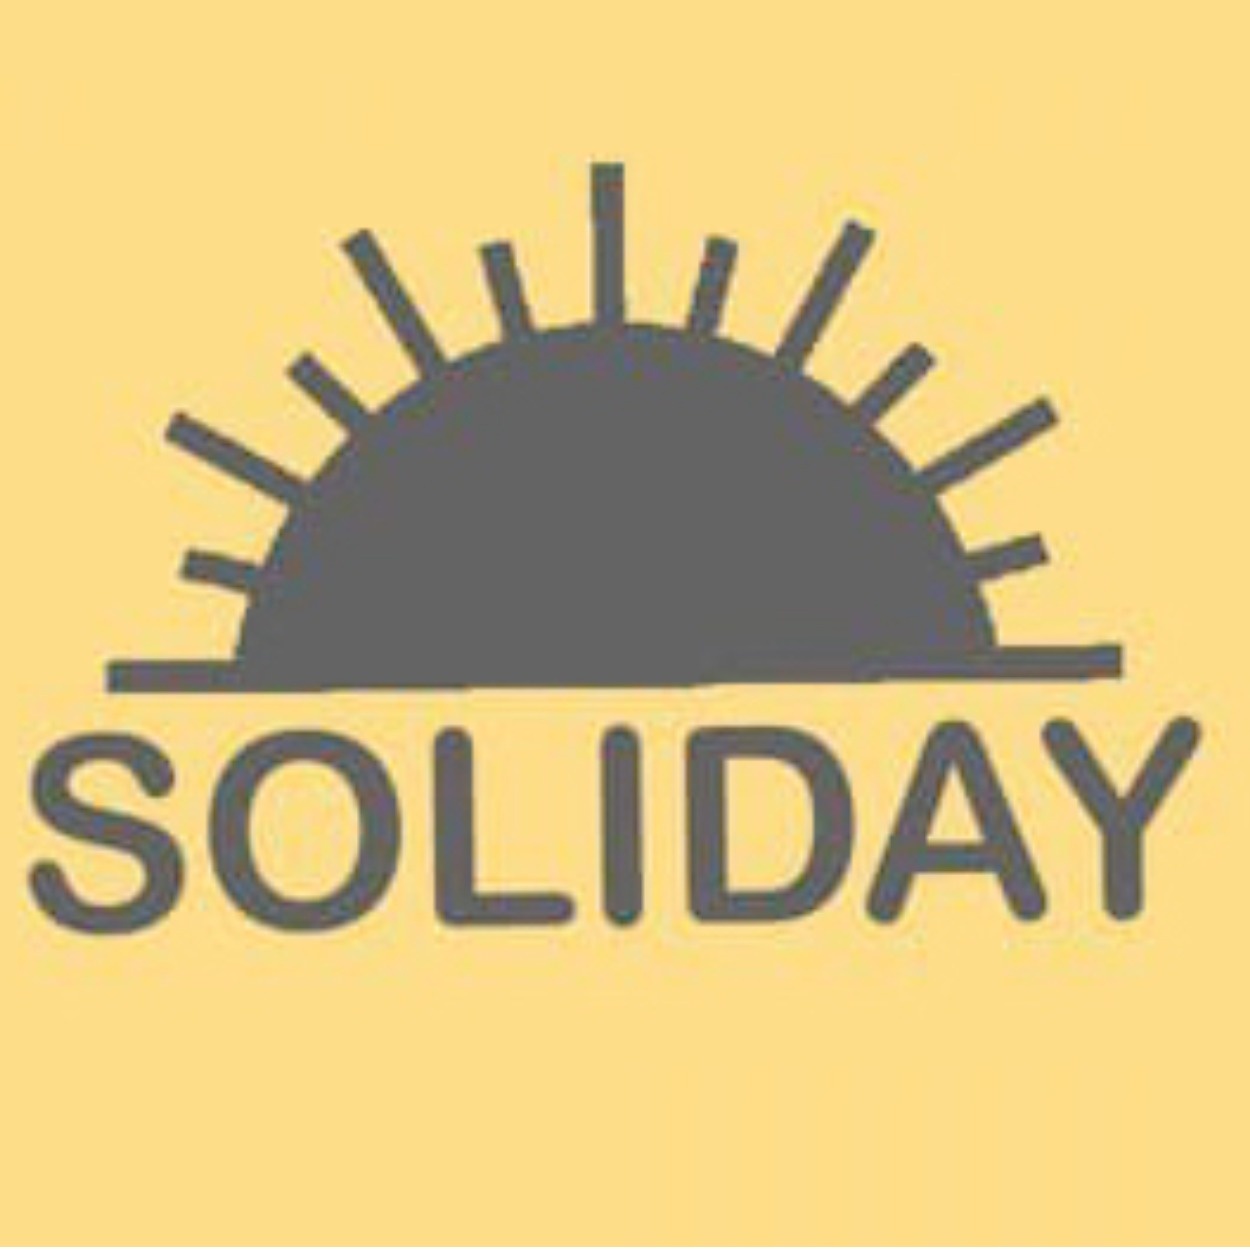 Soliday